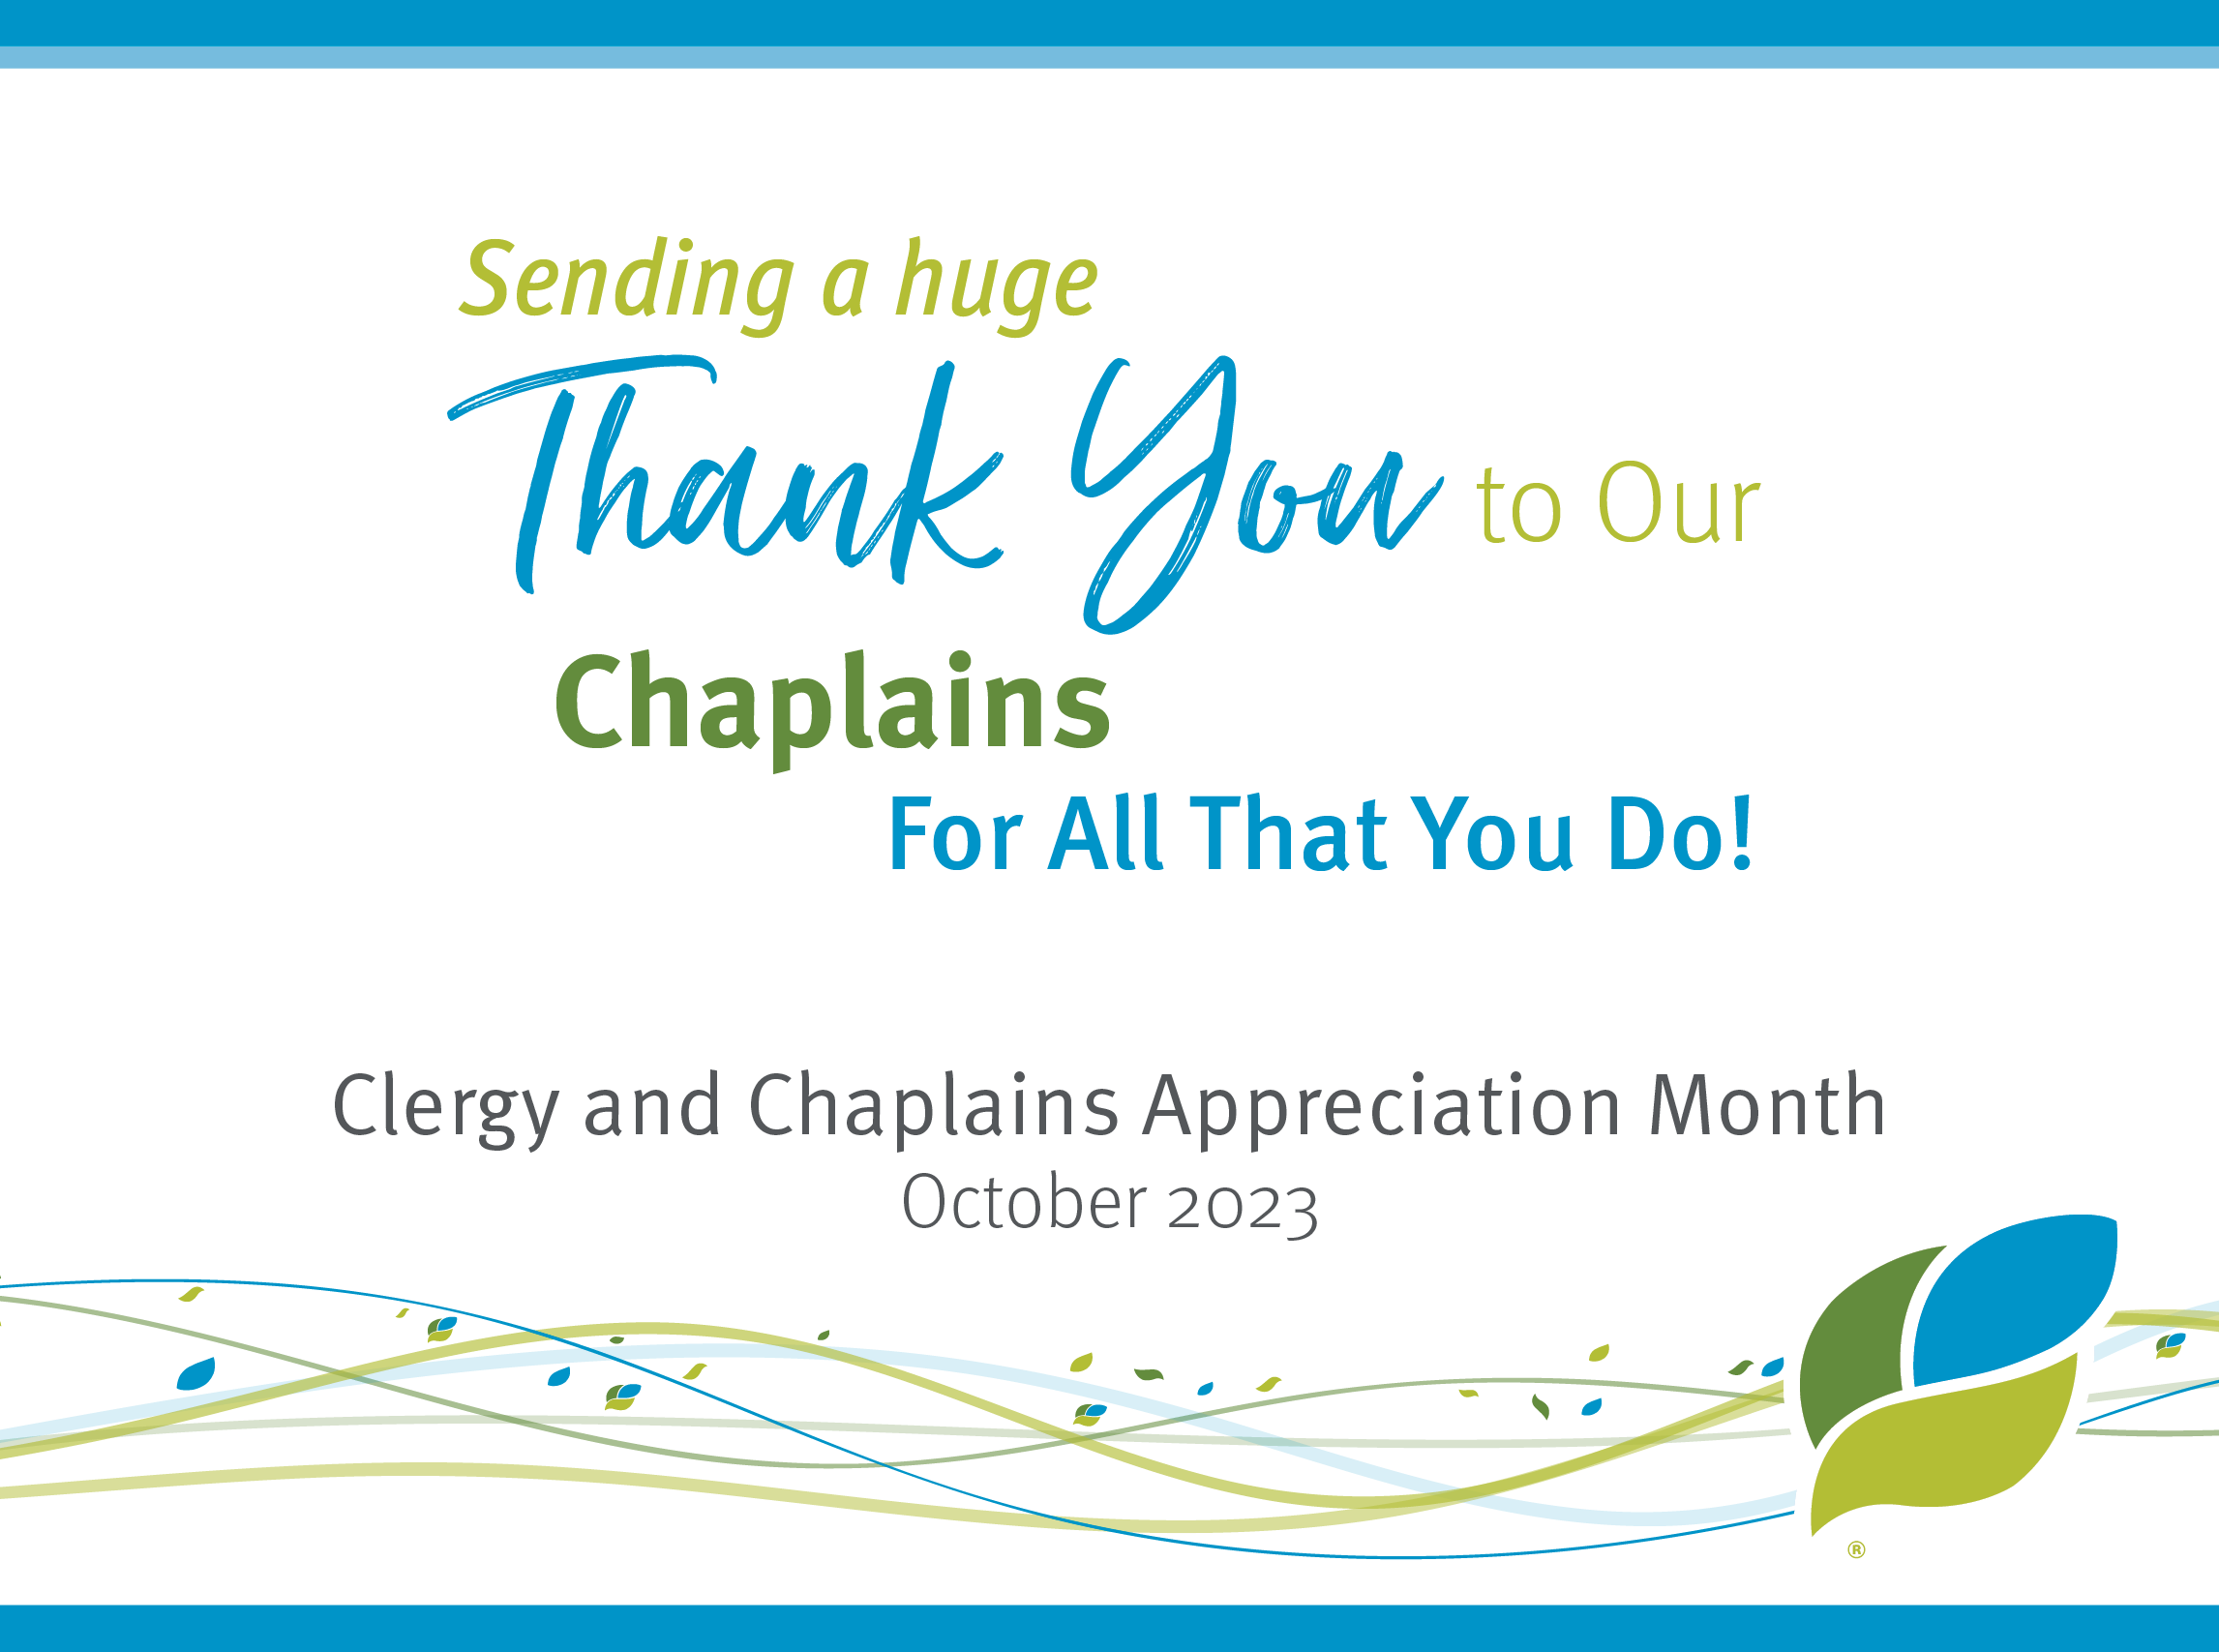 Sending a huge thank you to our chaplains for all that you do! Clergy and Chaplains Appreciation Month. October 2023. Ohio's Hospice